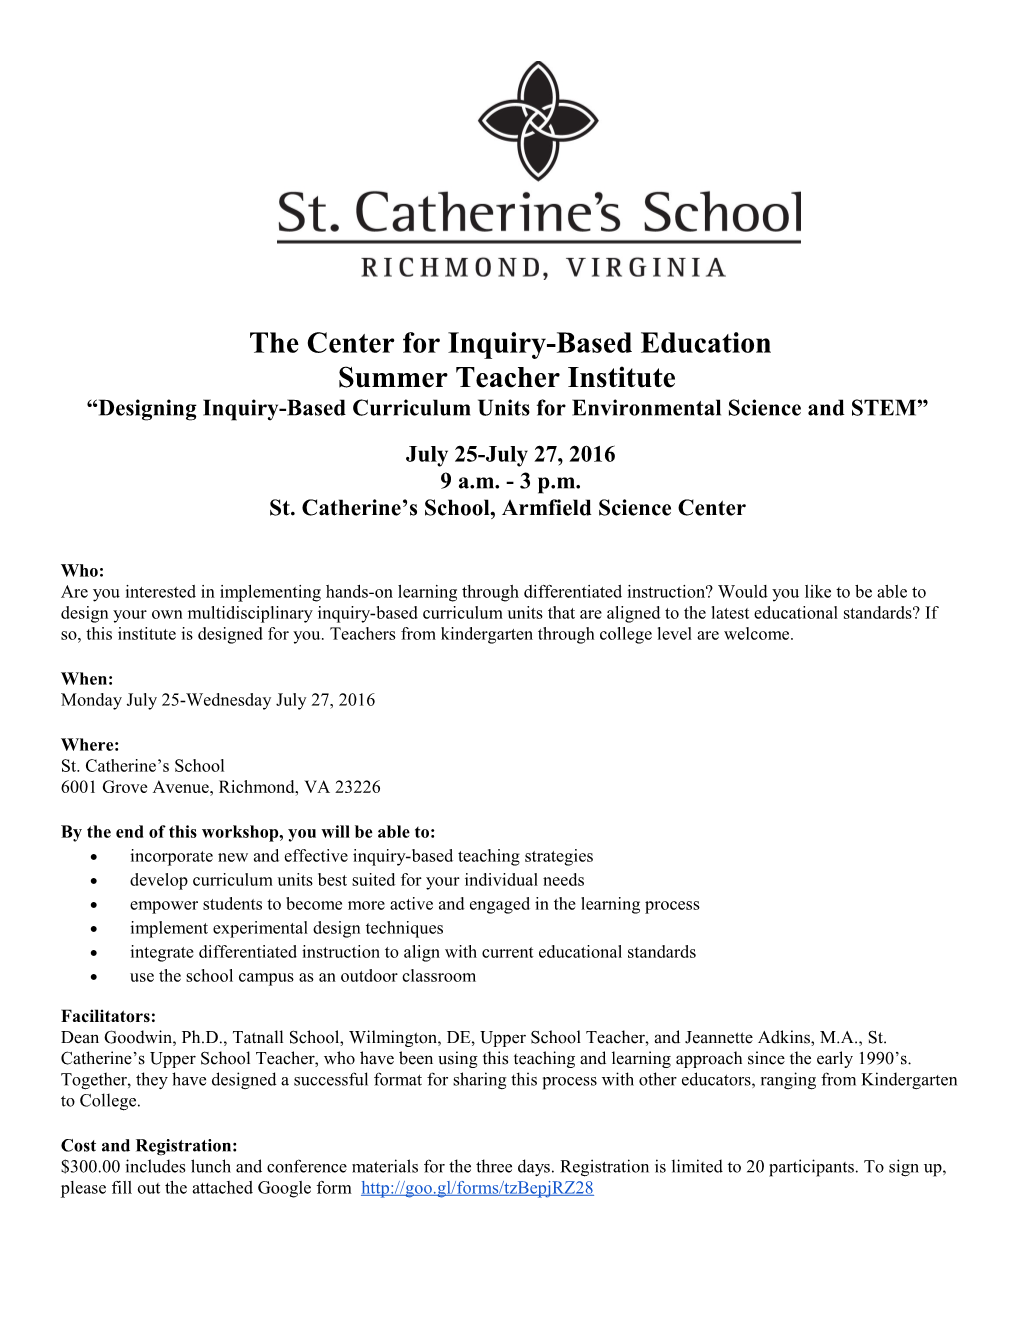 The Center for Inquiry-Based Education